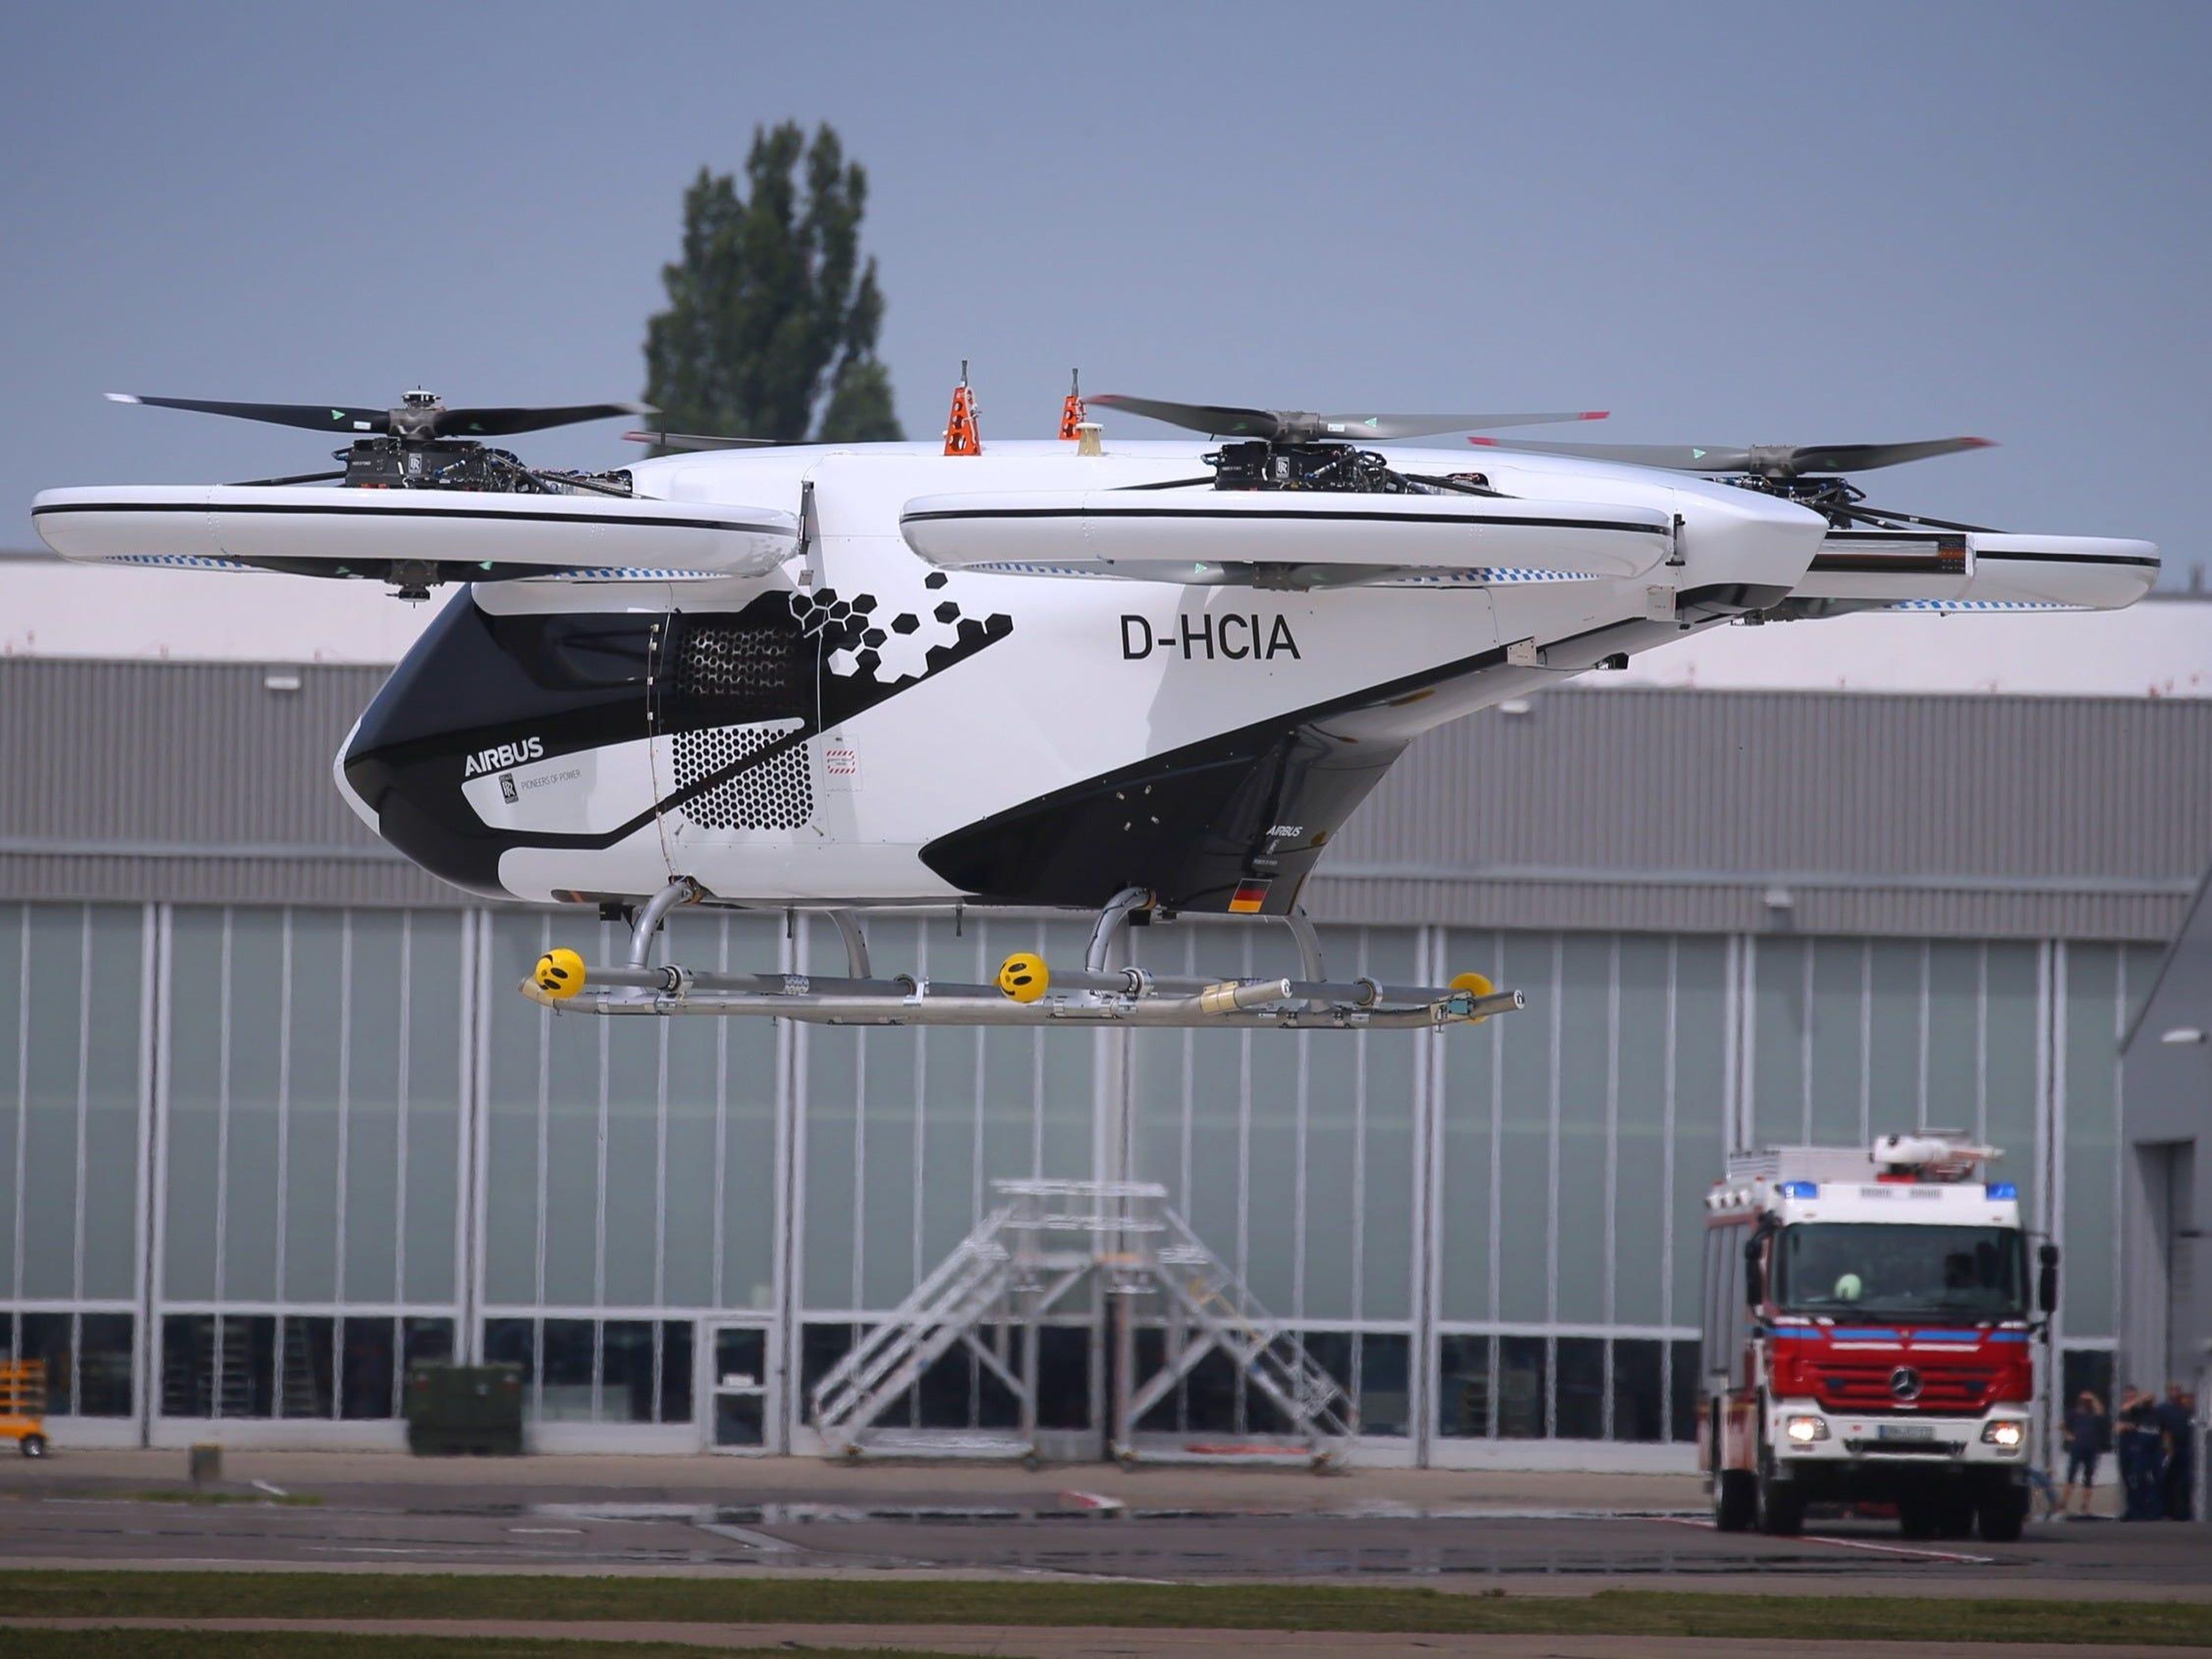 Though the hope is for Airbus' eVTOLs to fly completely autonomously in the future, initial plans call for CityAirbus to be a remotely-piloted aircraft.